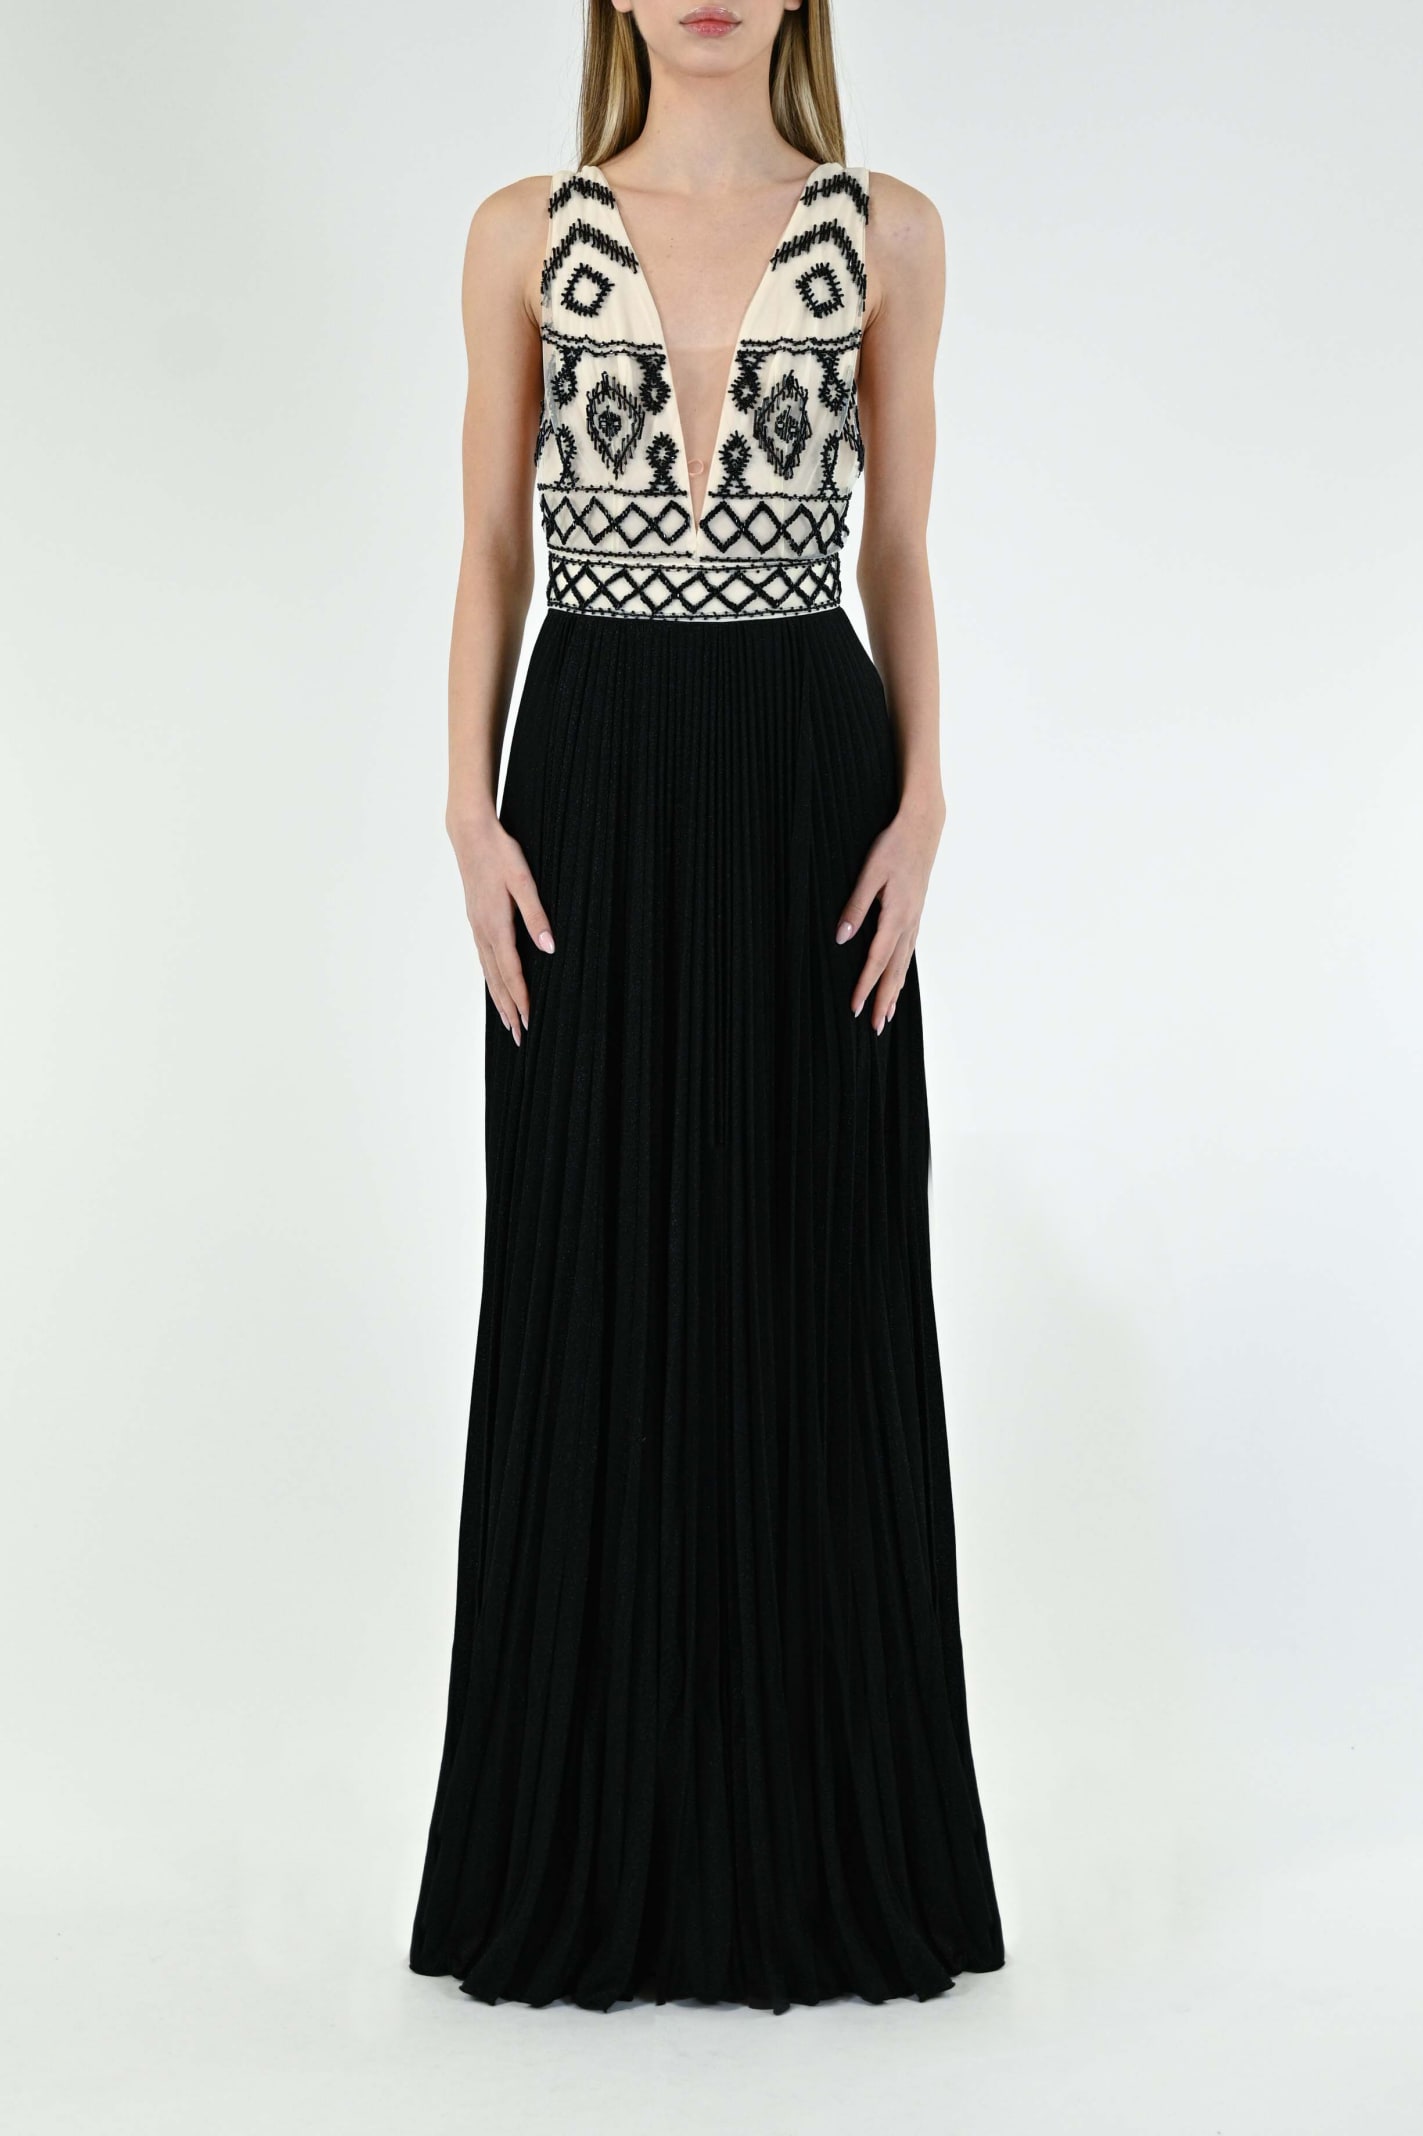 ELISABETTA FRANCHI RED CARPET DRESS WITH RHOMBUS EMBROIDERY